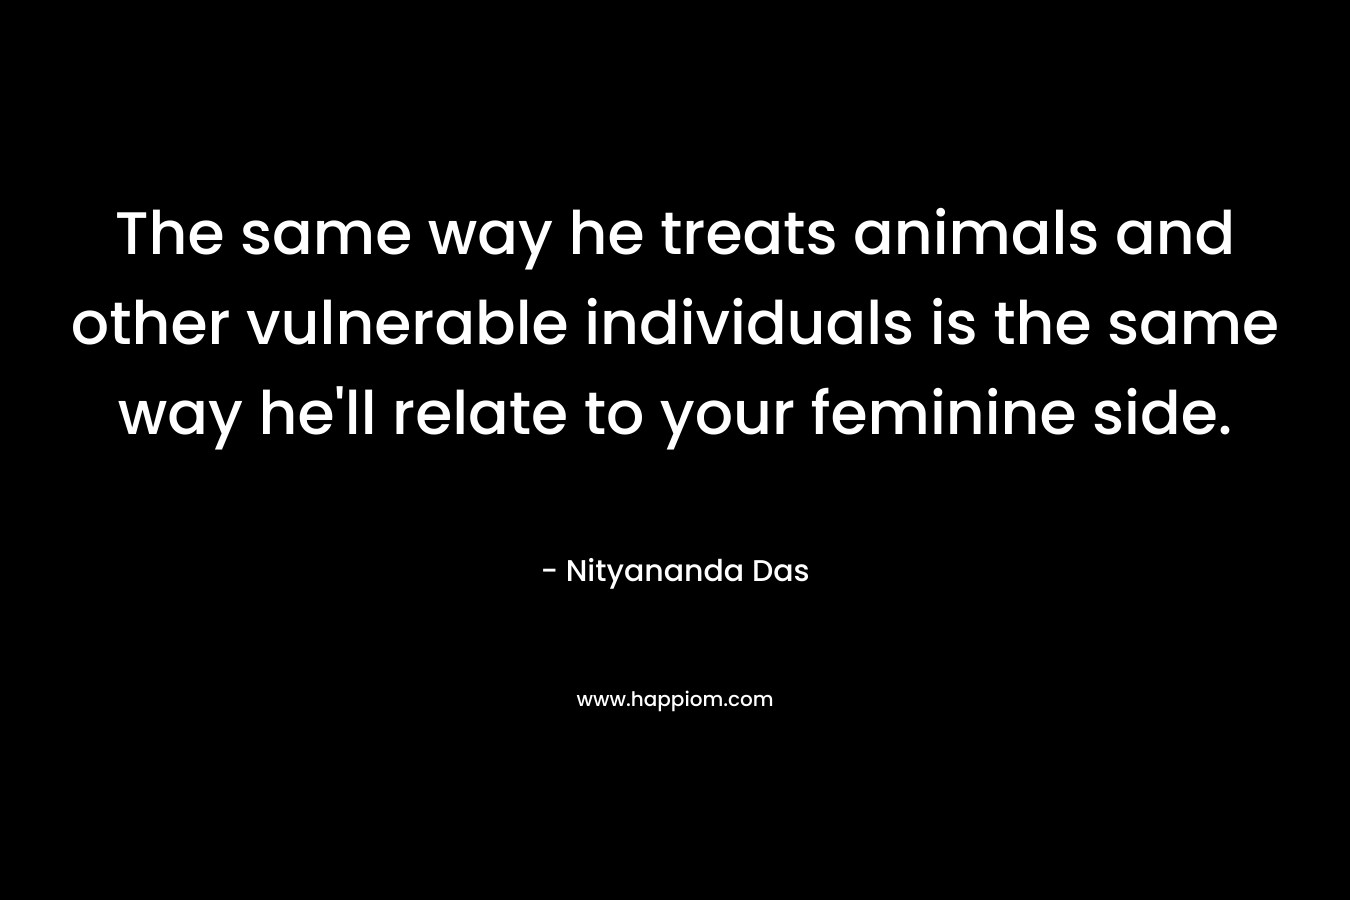 The same way he treats animals and other vulnerable individuals is the same way he’ll relate to your feminine side. – Nityananda Das